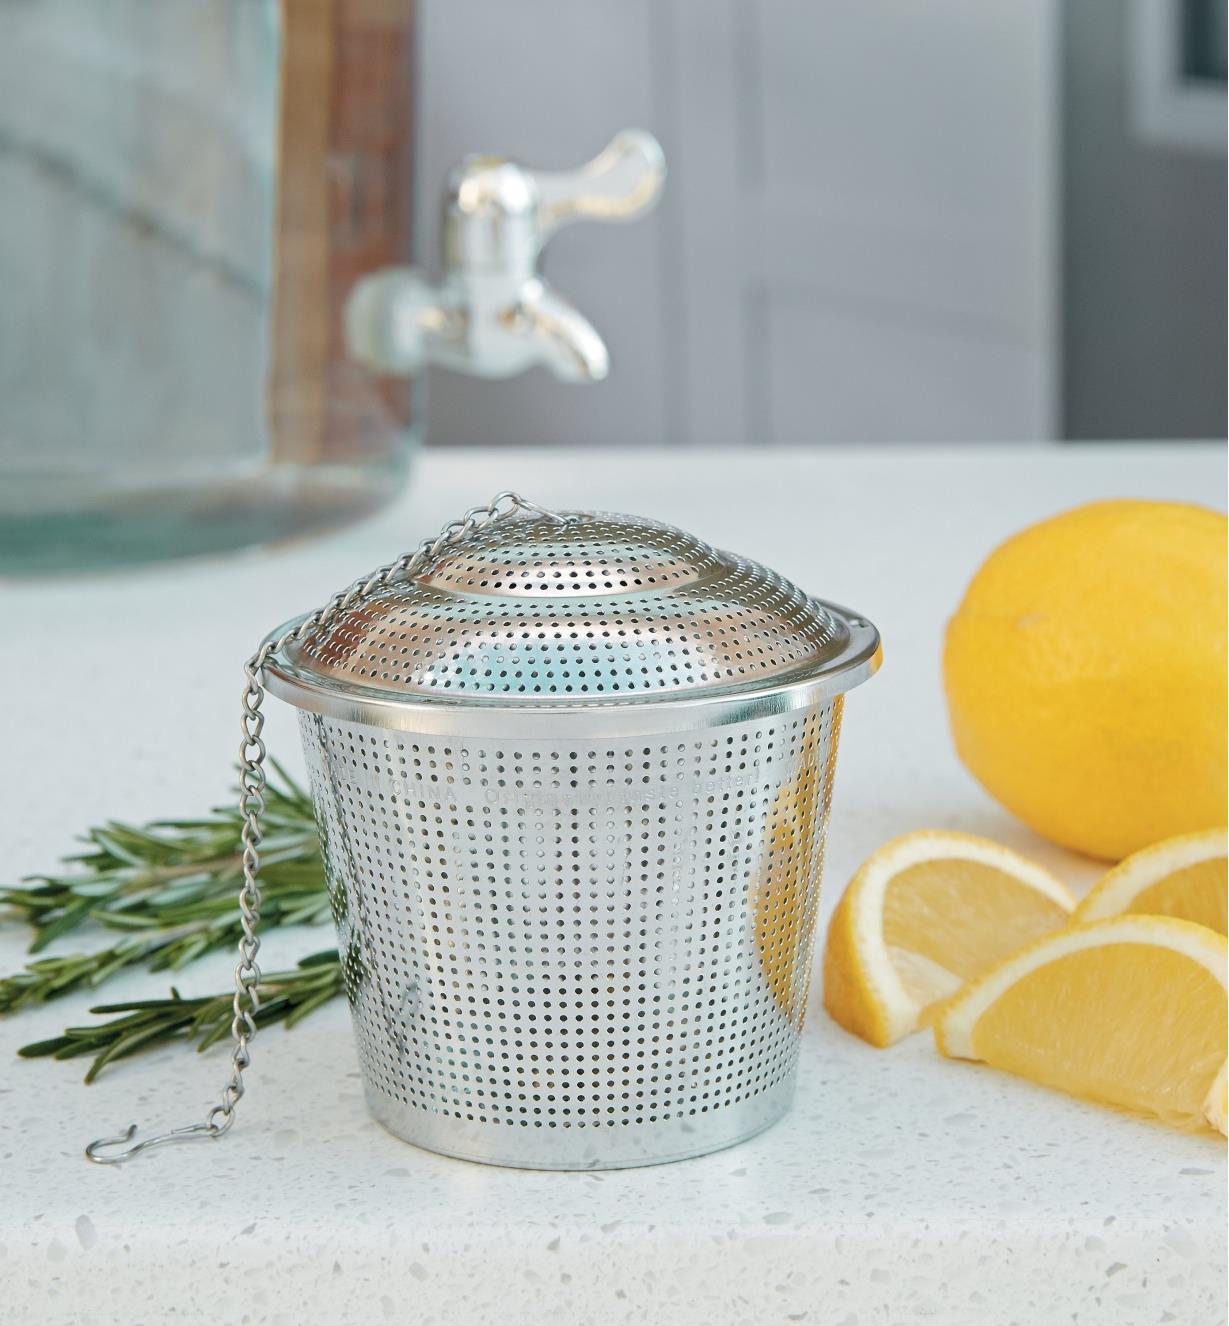 Large Infuser Basket on a counter beside orange slices and rosemary